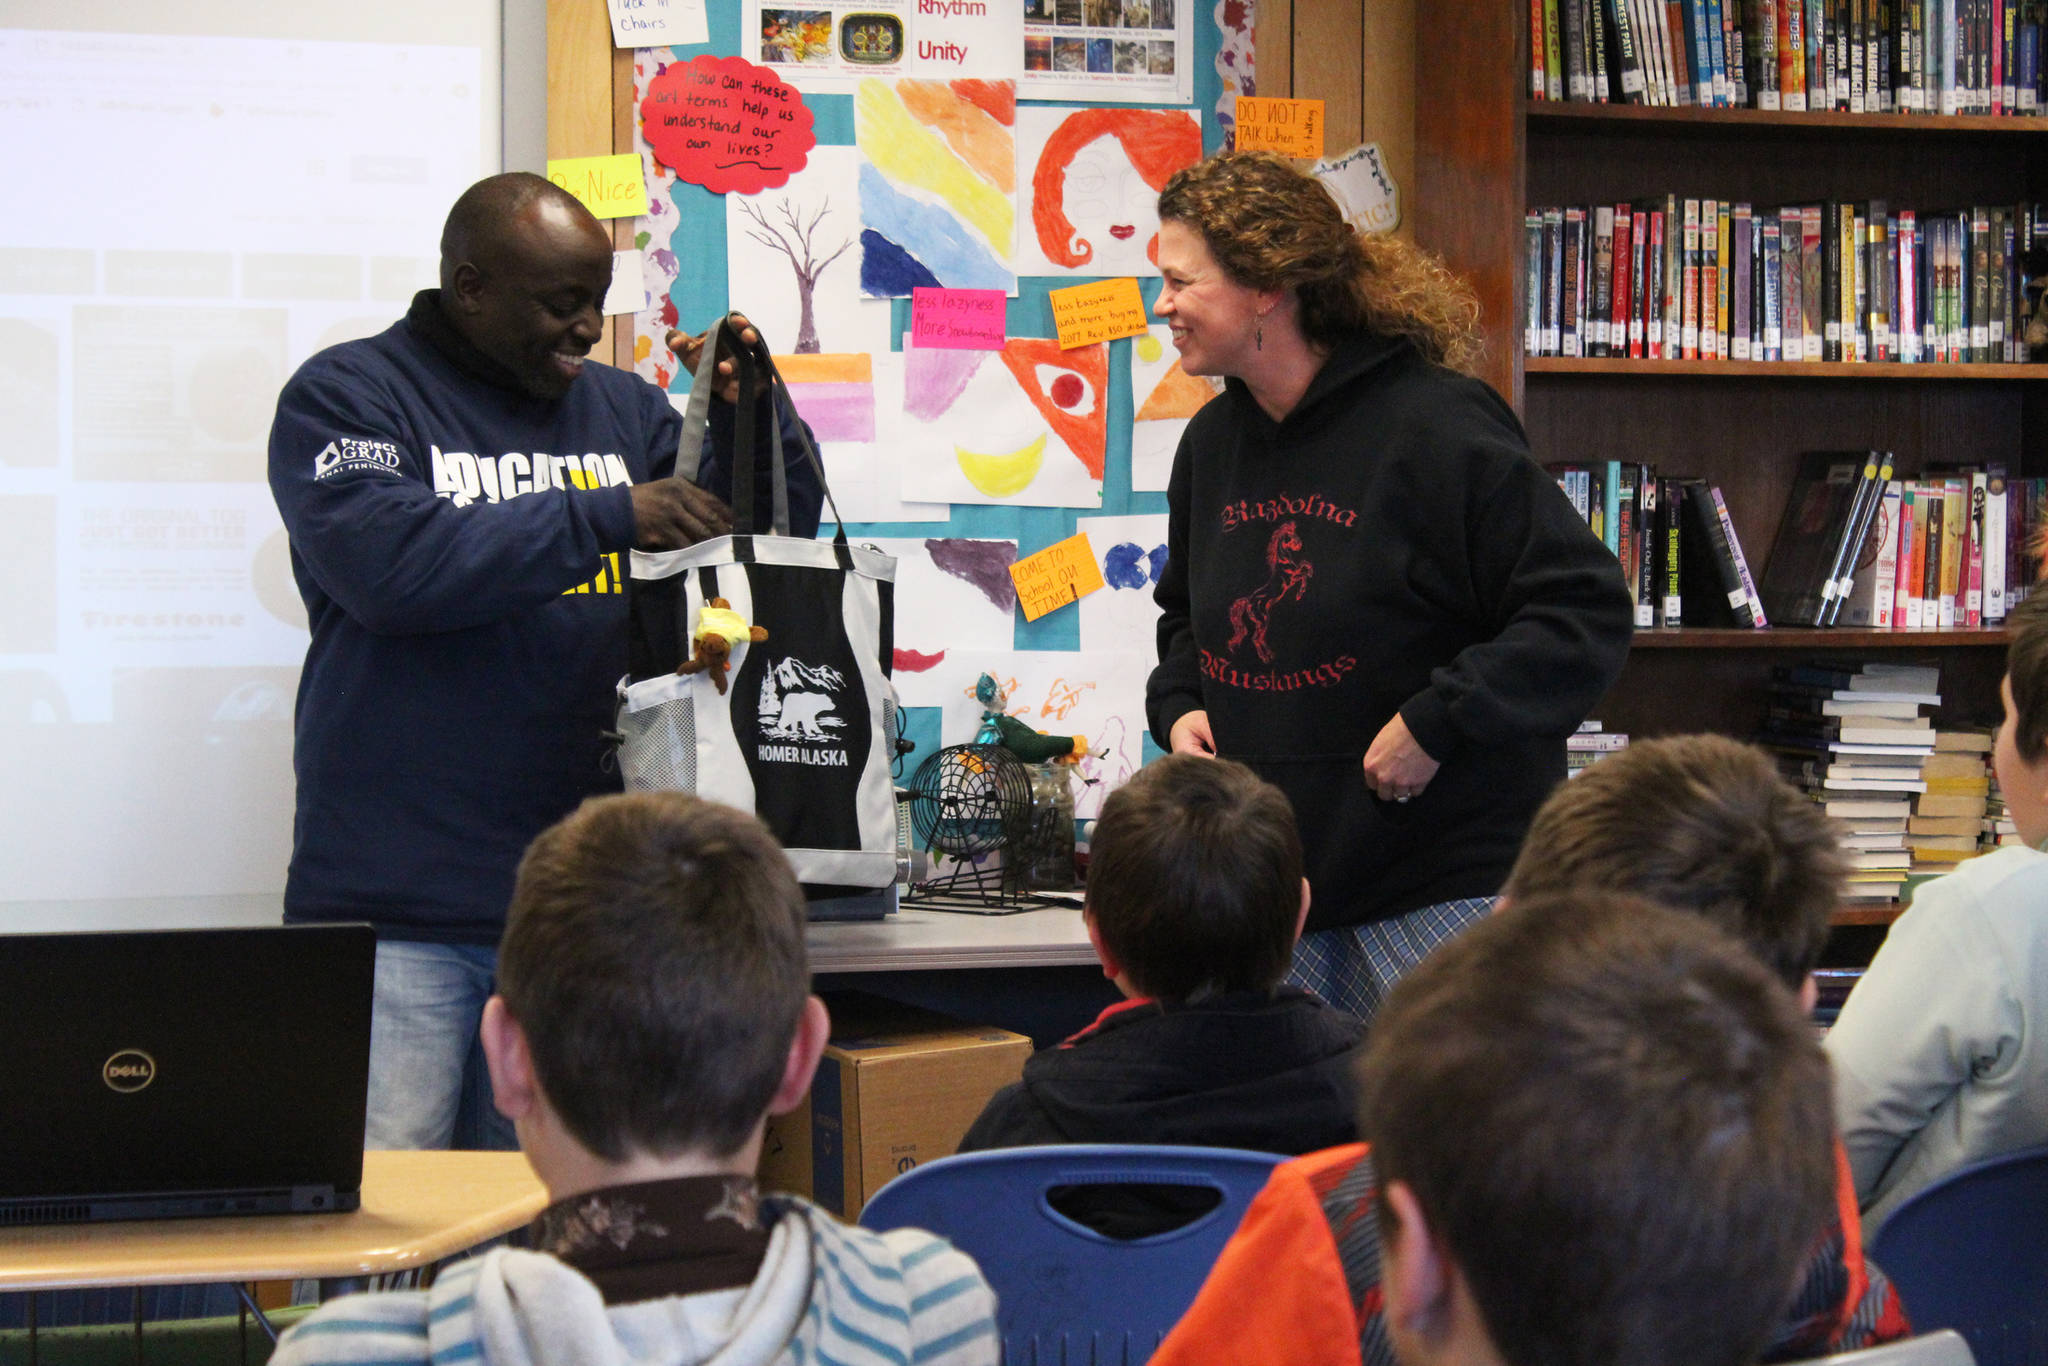 Laura Murphy, a teacher at Razdolna School, presents Chris Mburu, a human rights lawyer who works for the United Nations, with a care package full of Alaska-themed gifts during his presentation to the school Friday, Nov. 17, 2017 in Razdolna, Alaska. The students gifted Mburu and fellow presenter Kimani Nyambura, both from Kenya, several things from their area, including smoked salmon, the pelt of an ermine one of the students had trapped, and a pumpkin grown in one of the nearby high tunnels. (Photo by Megan Pacer/Homer News)